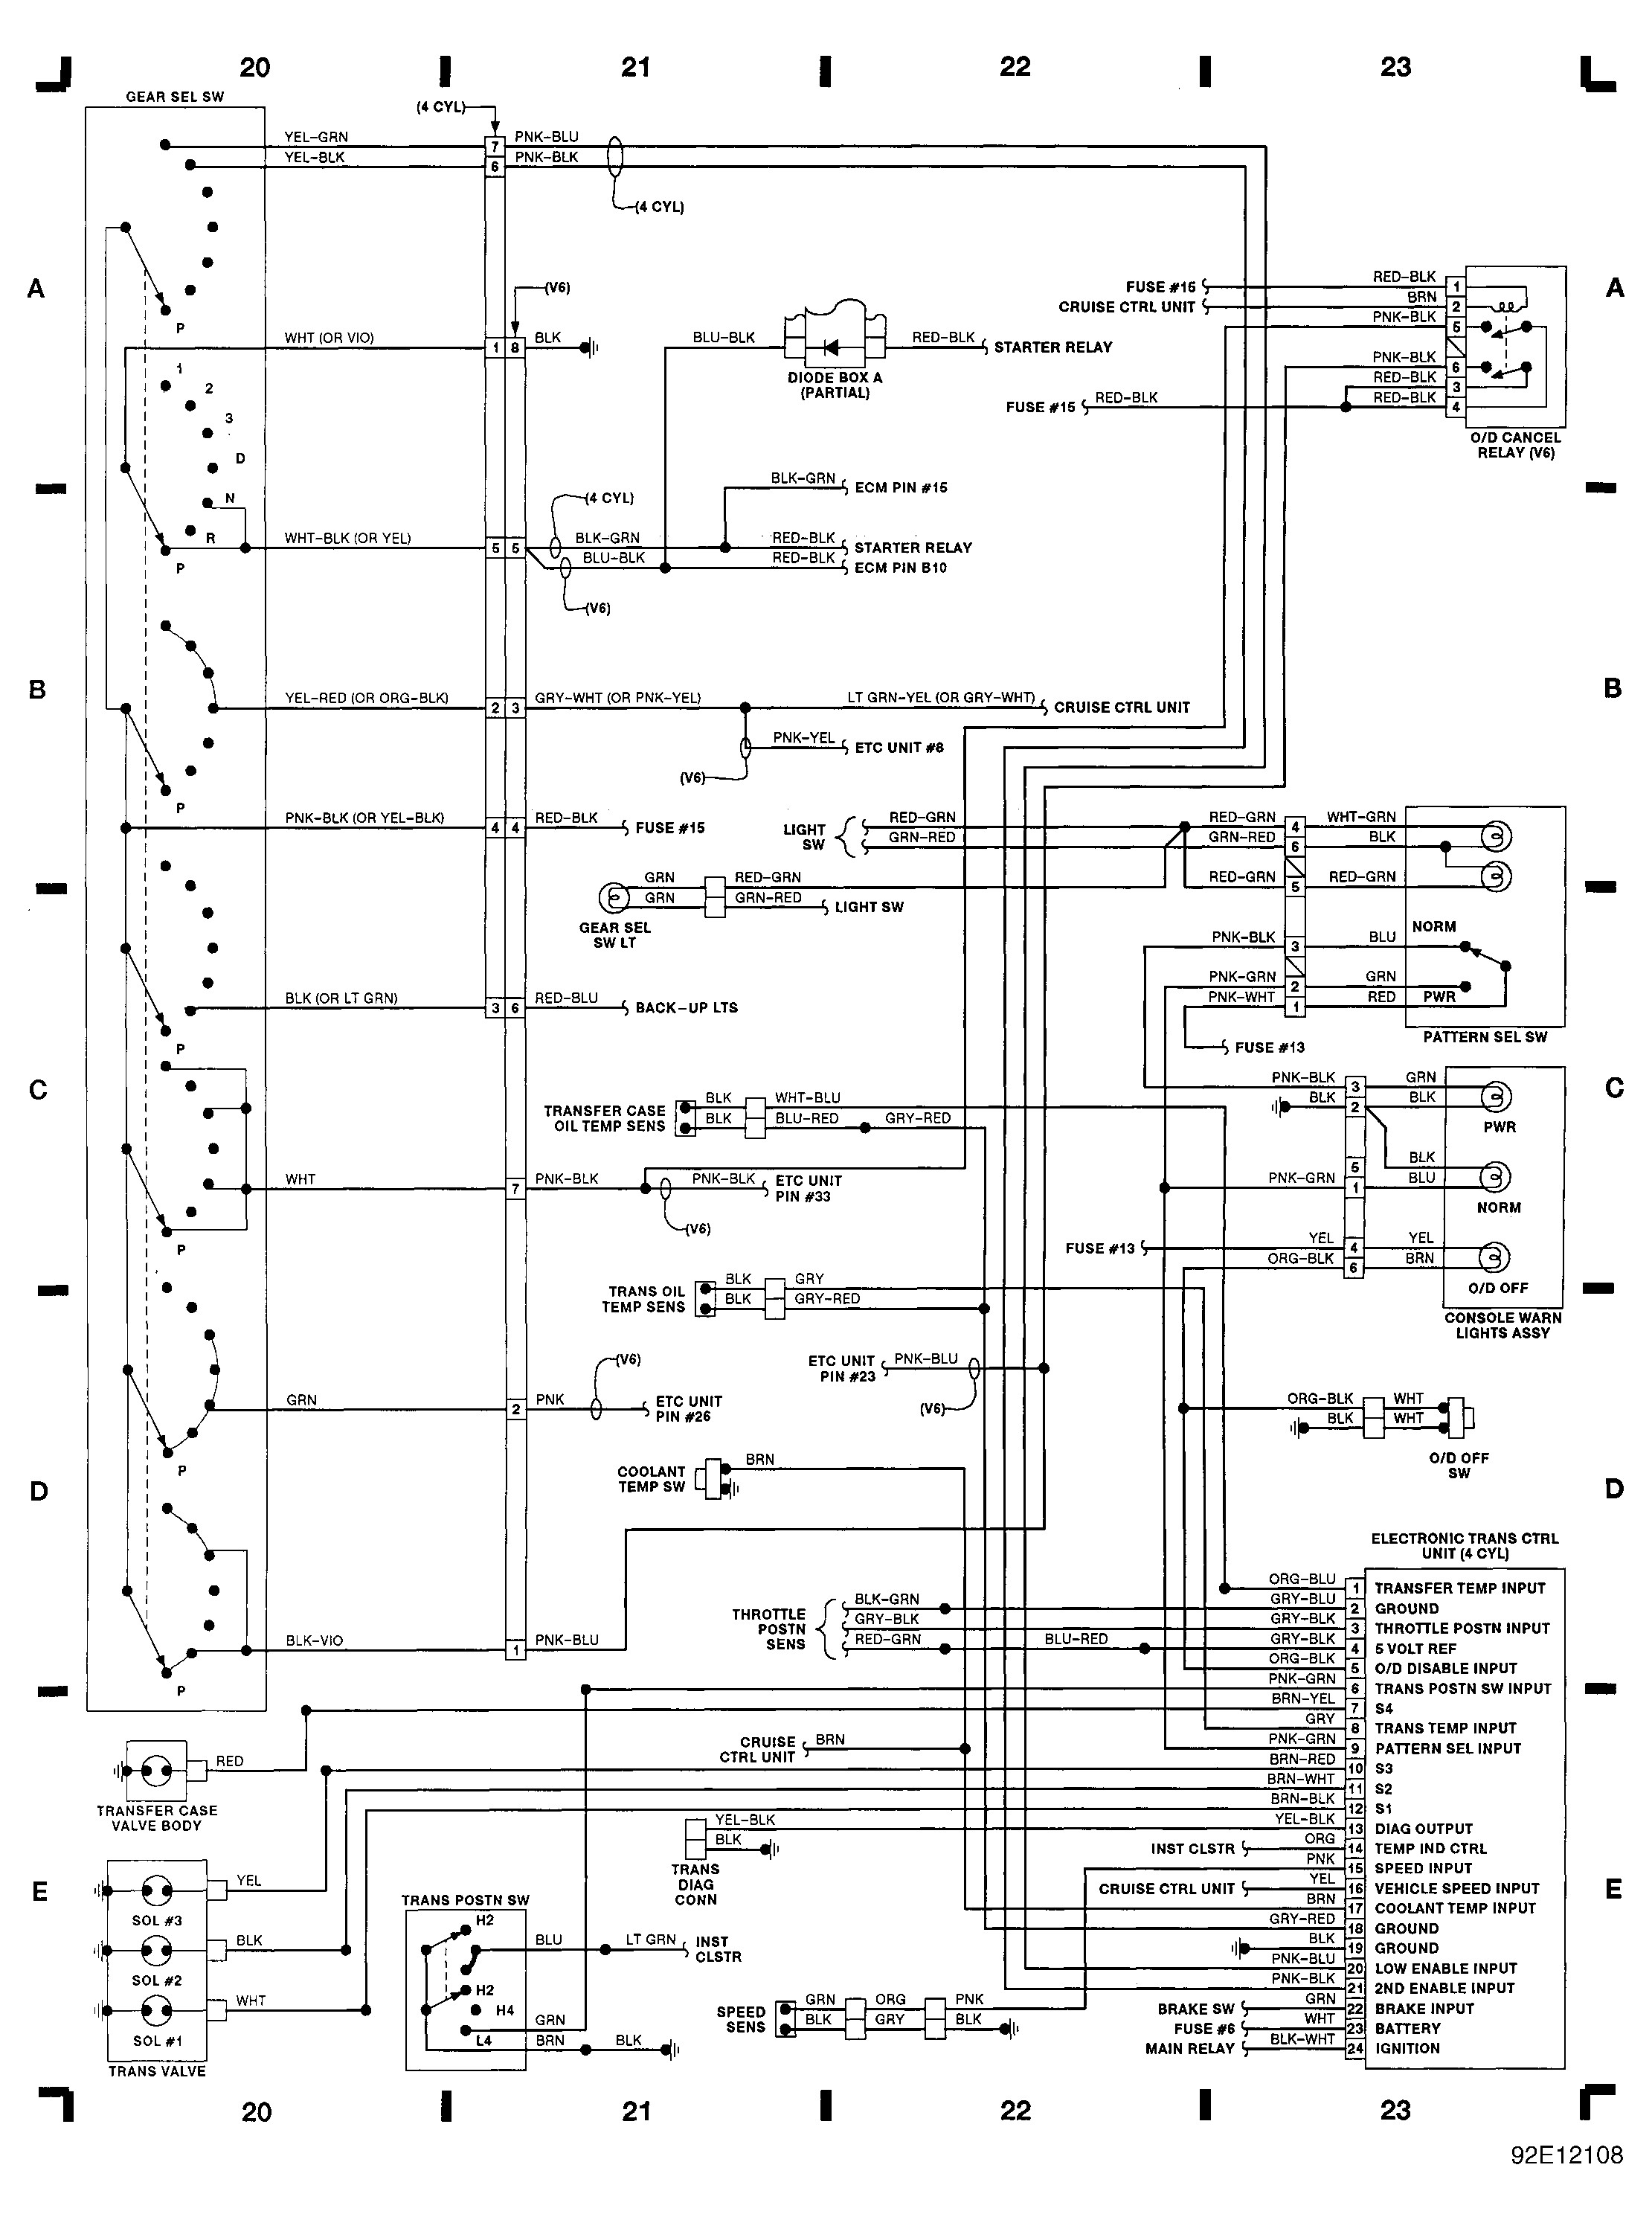 Dfd31b Rover 75 Fuse Box Diagram Wiring Library